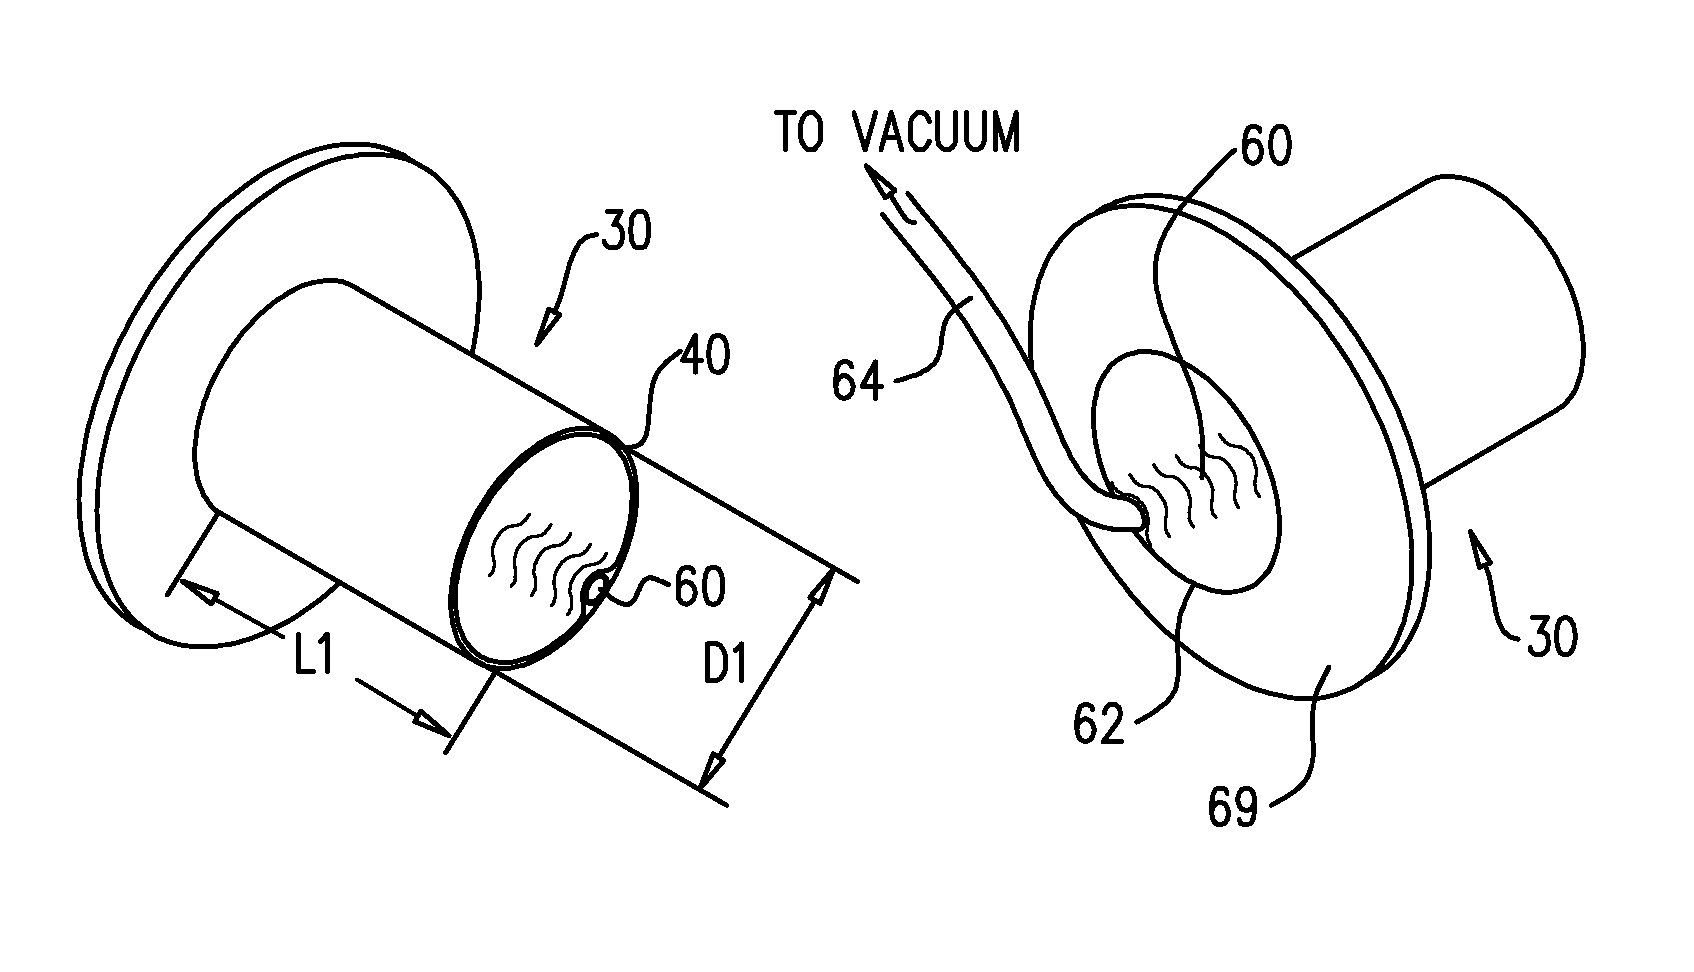 Surgical techniques and closure devices for direct cardiac catheterization